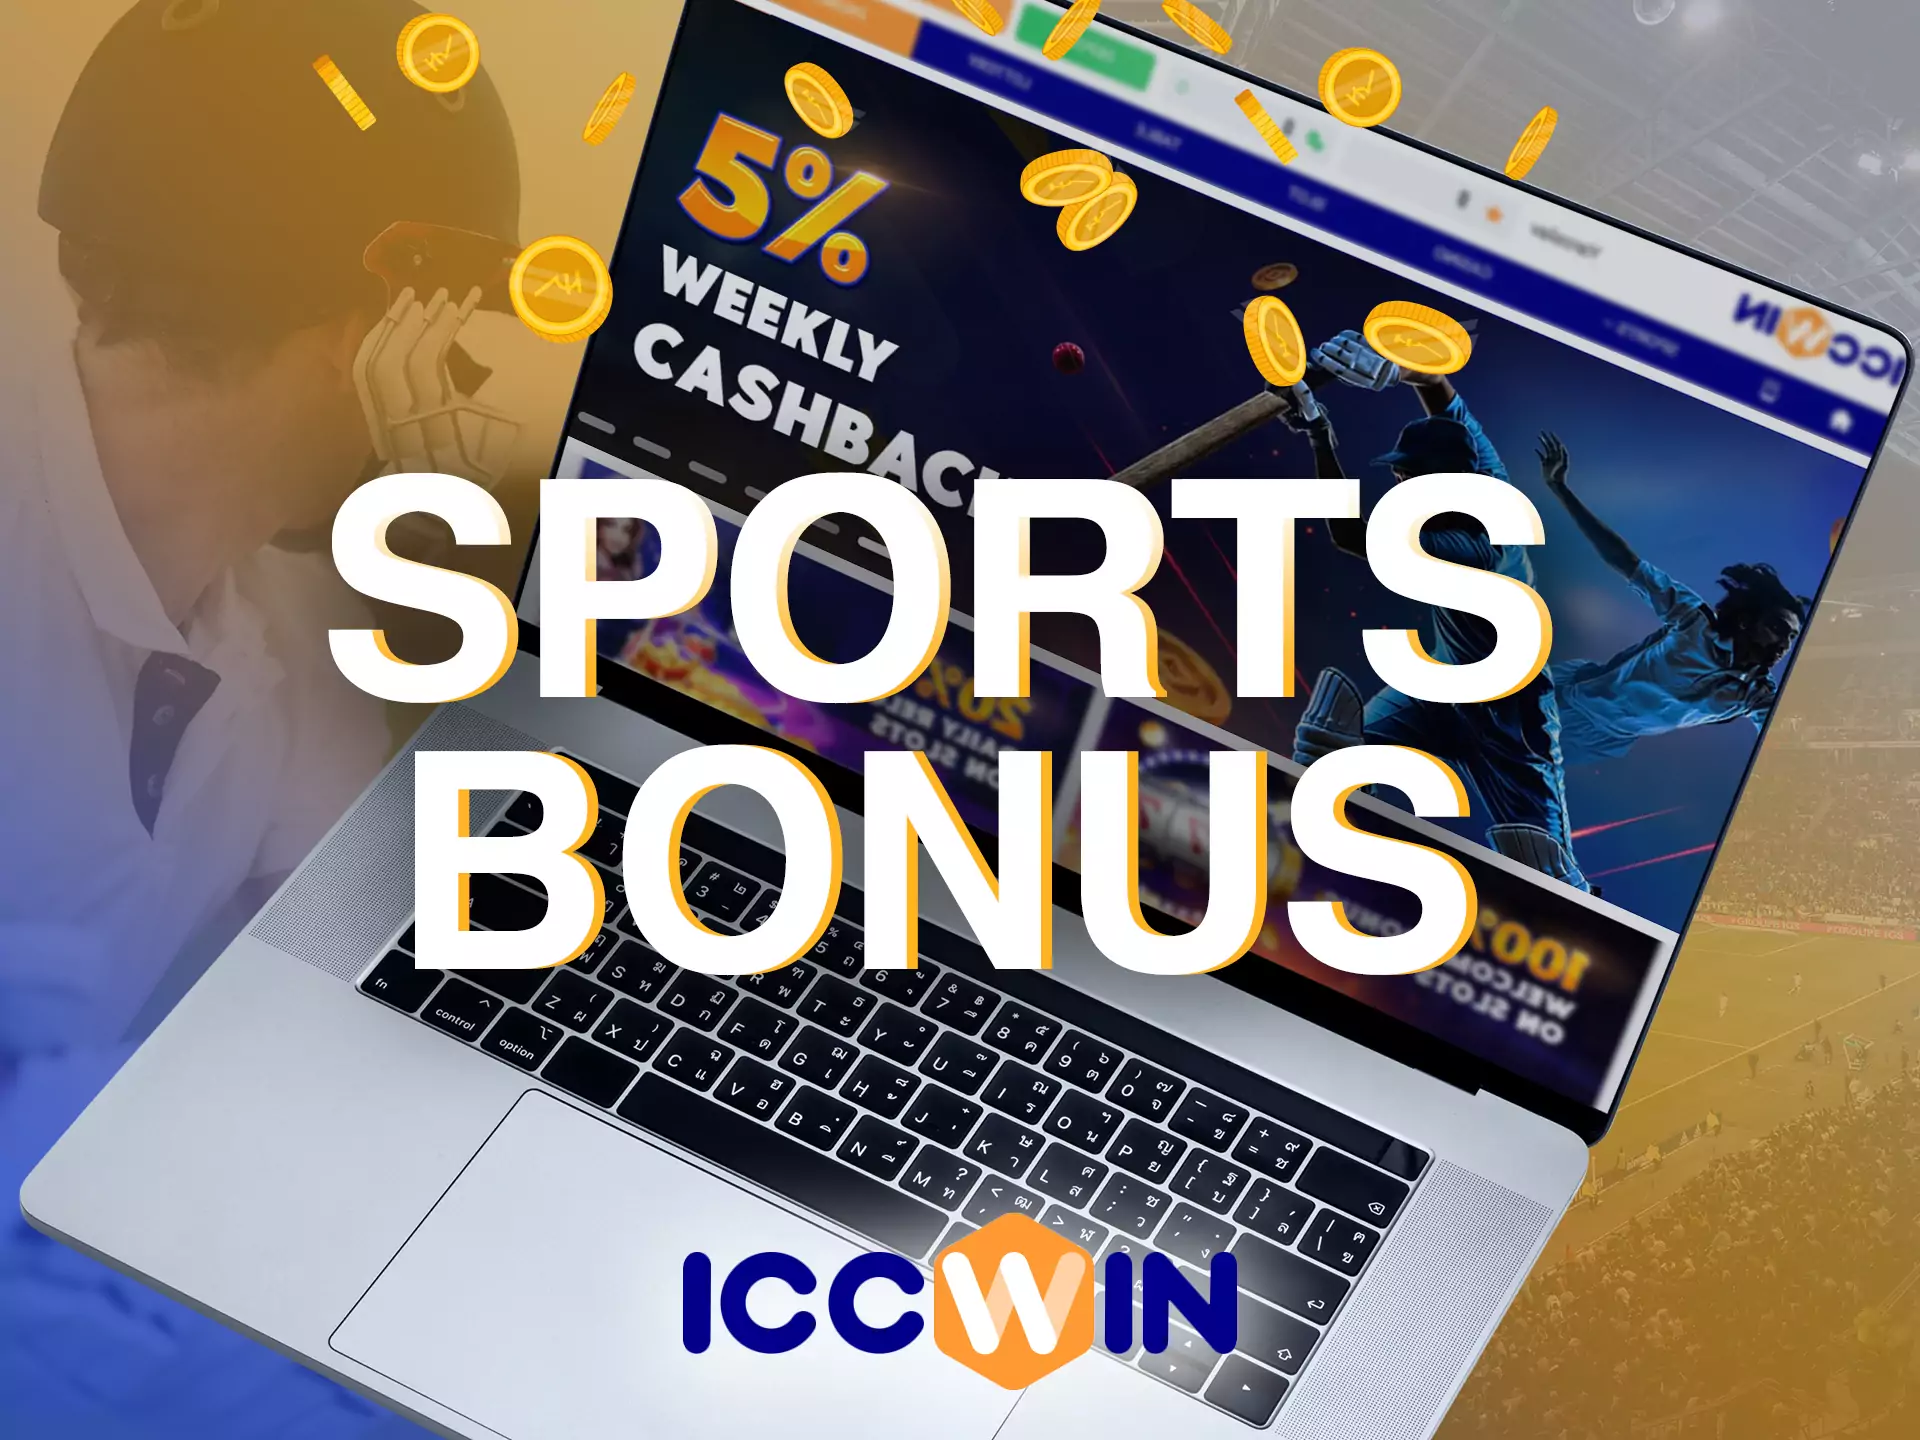 Every week, users get a cashback from betting on sports matches on ICCWin.